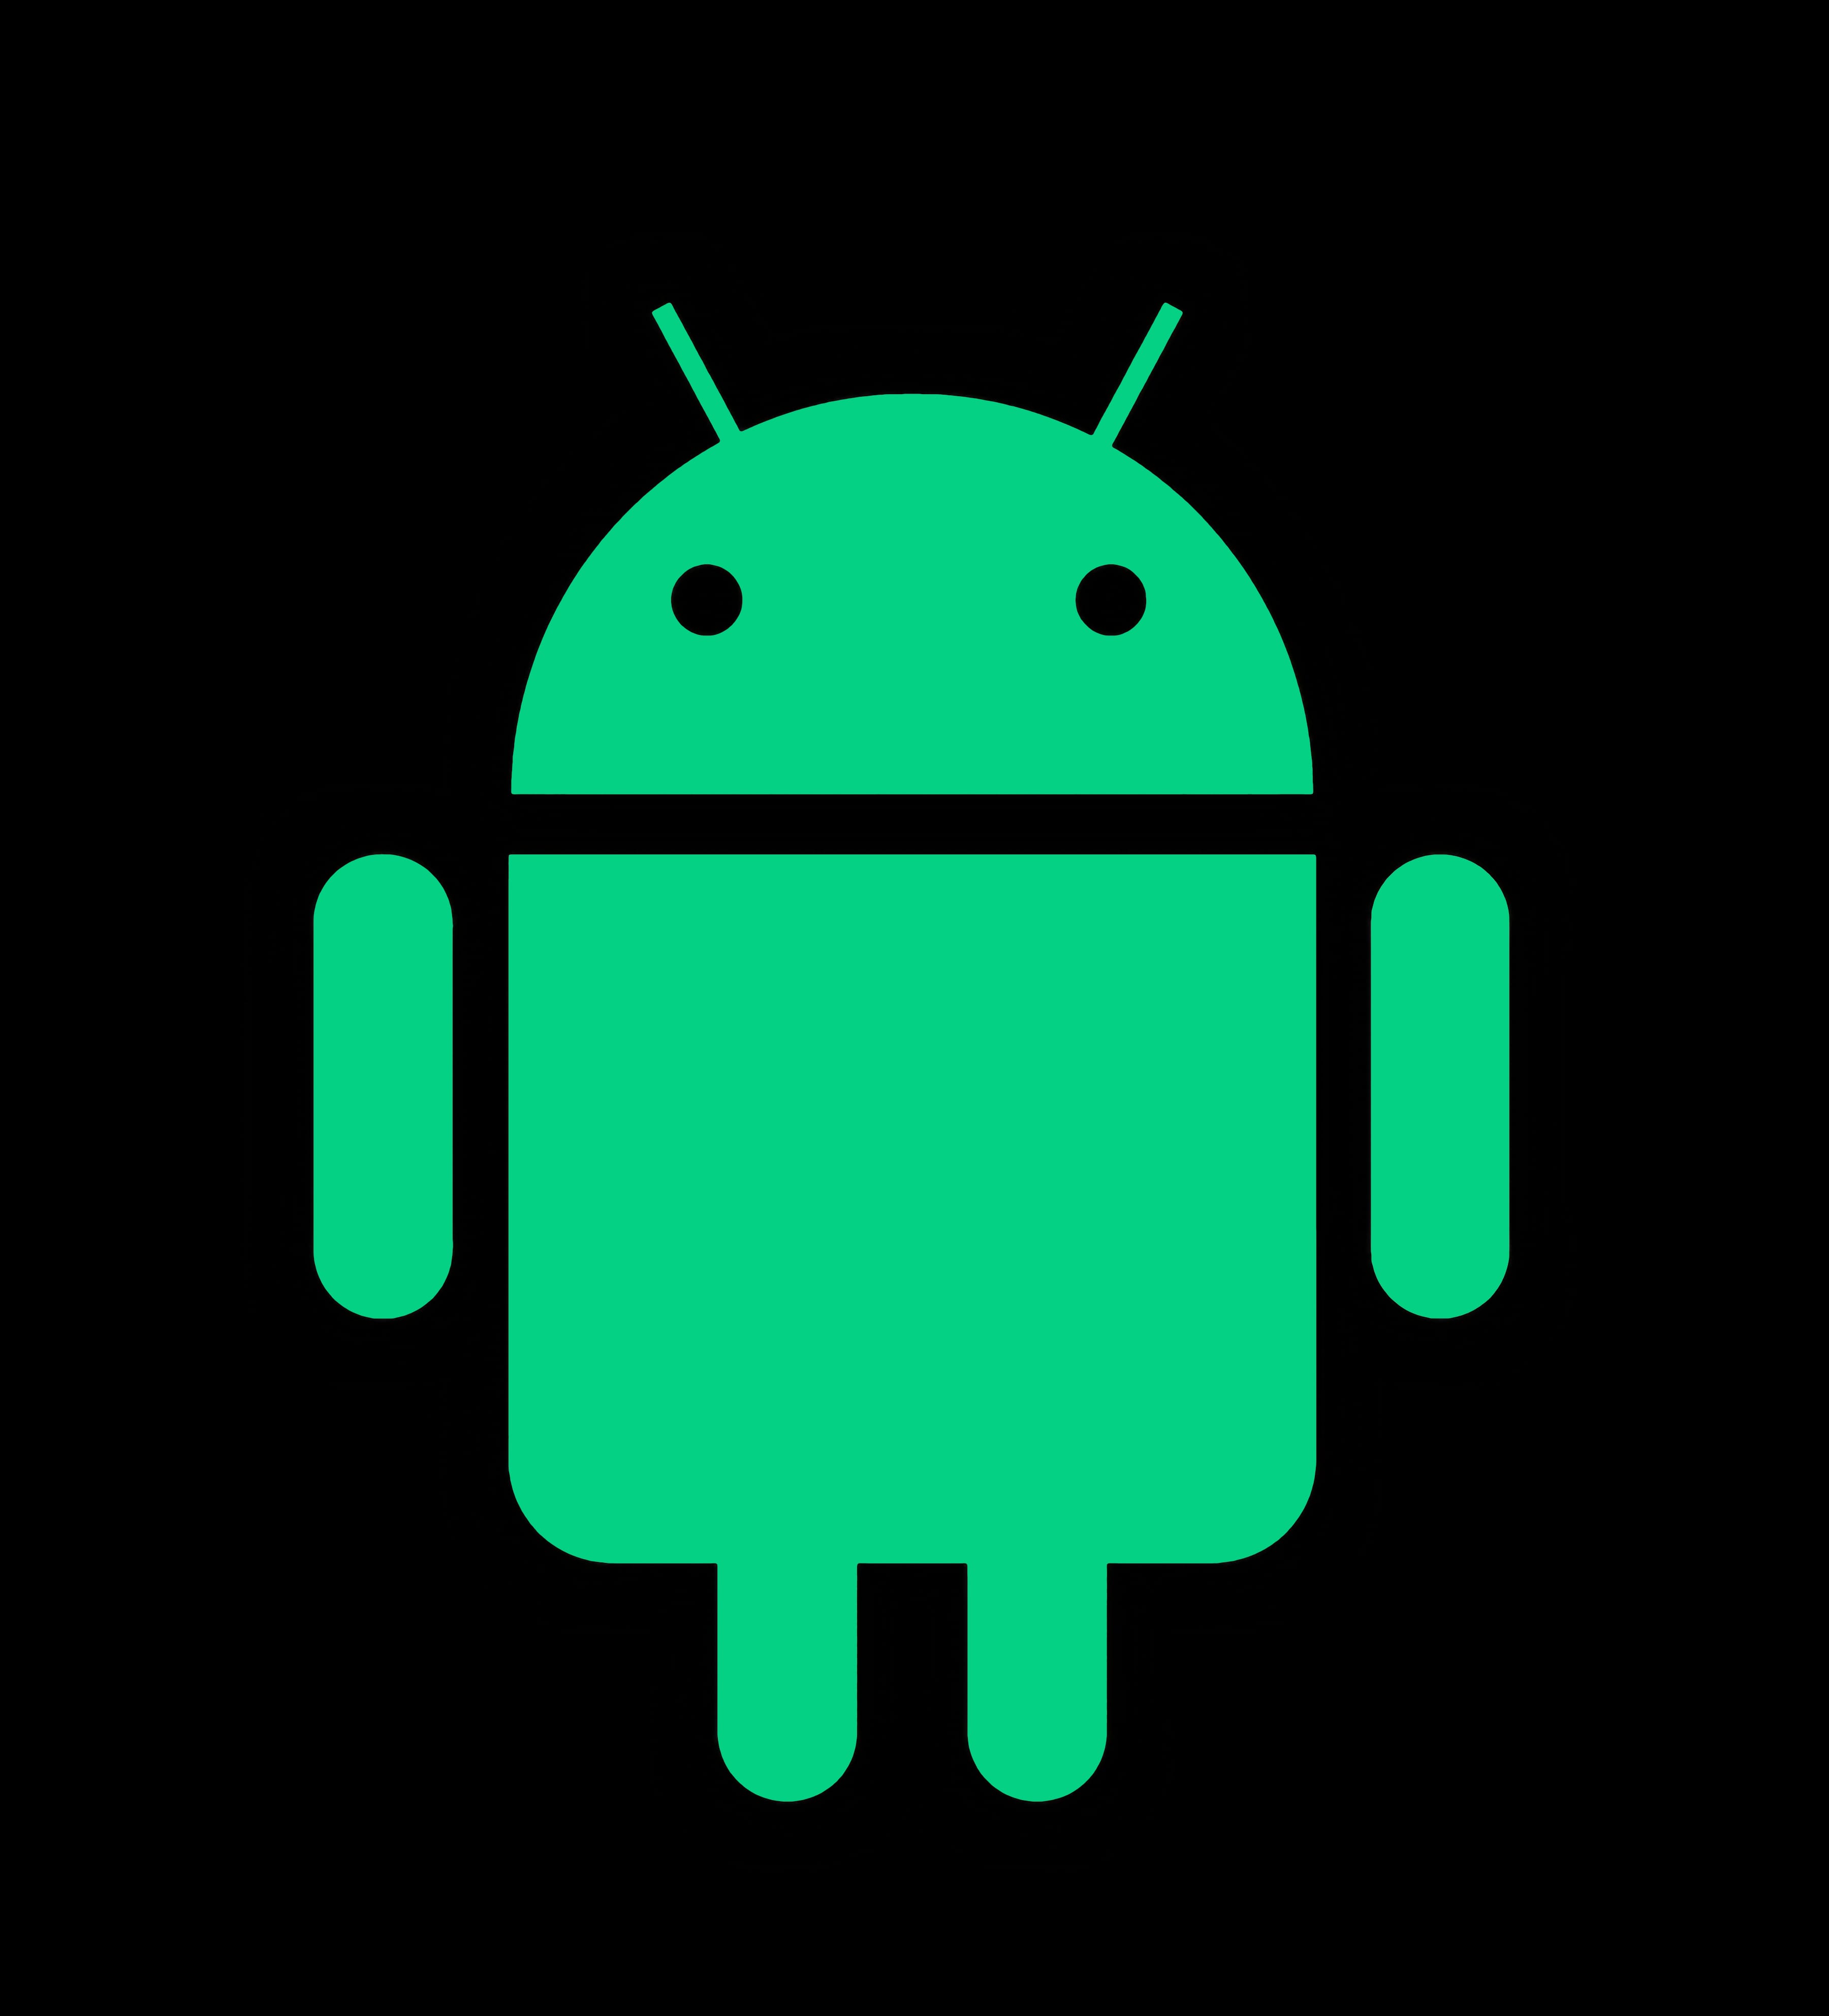 The Android mascot, a stylized android